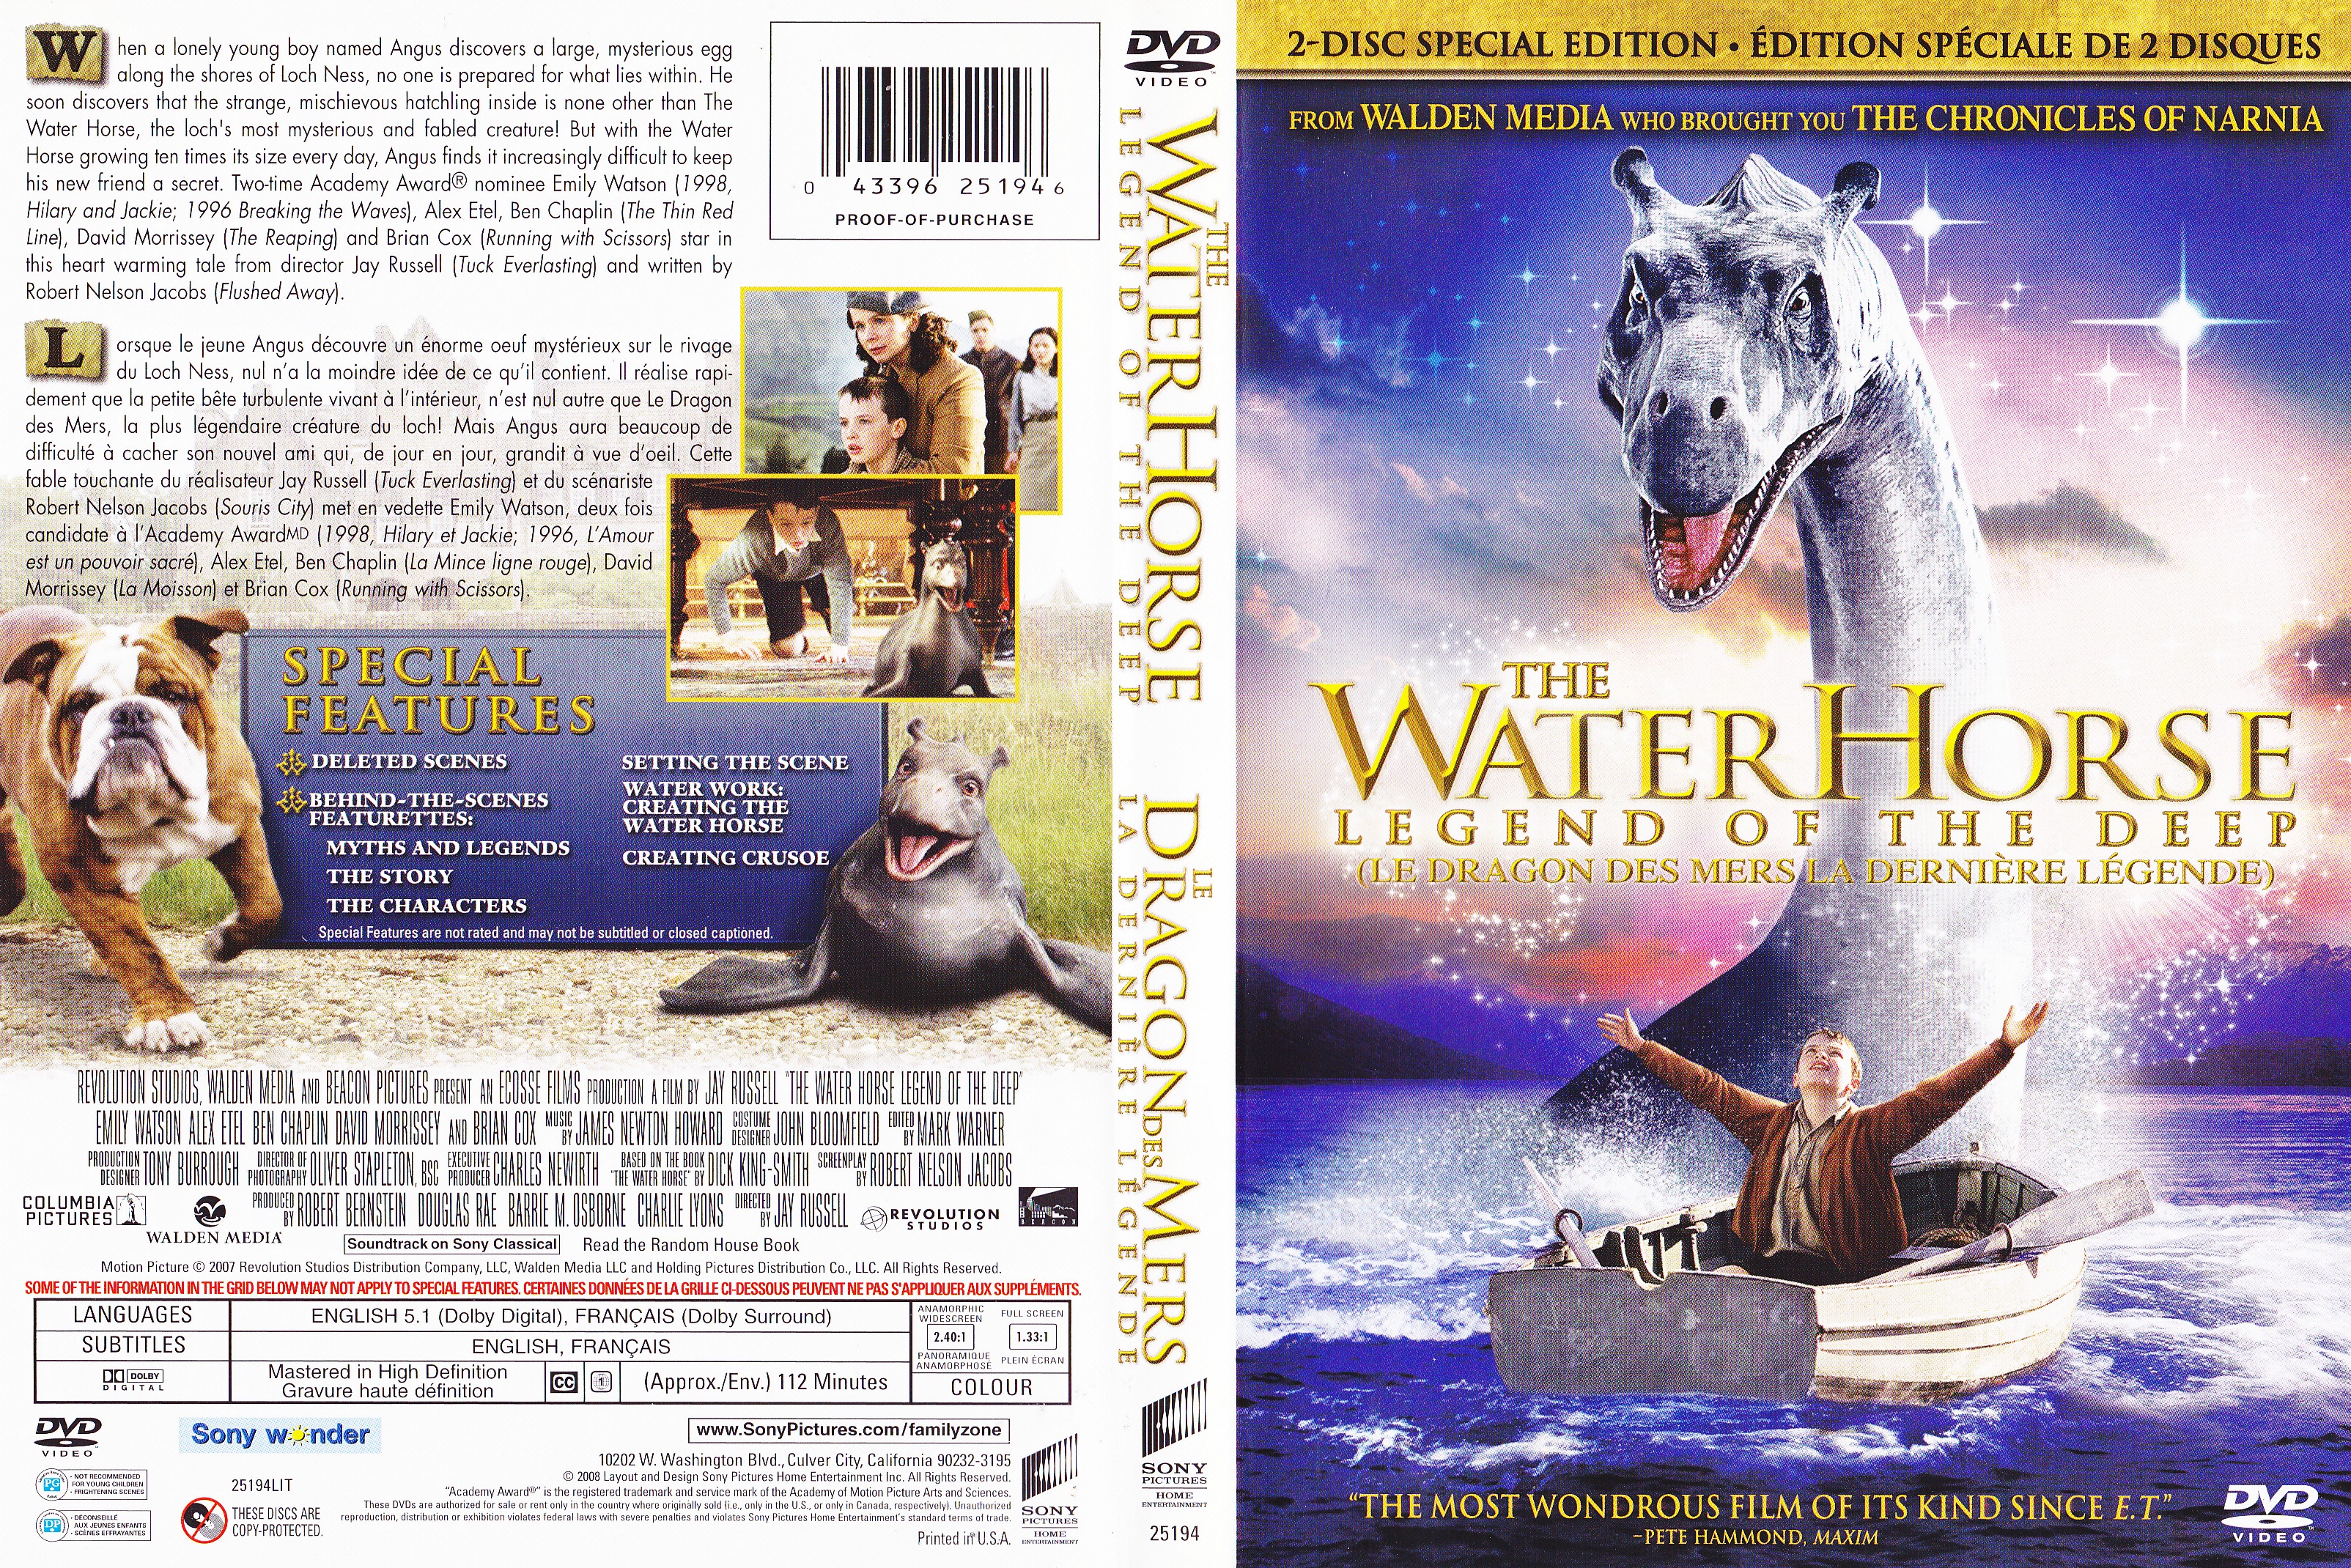 Jaquette DVD Le dragon des mers - The water horse (Canadienne)